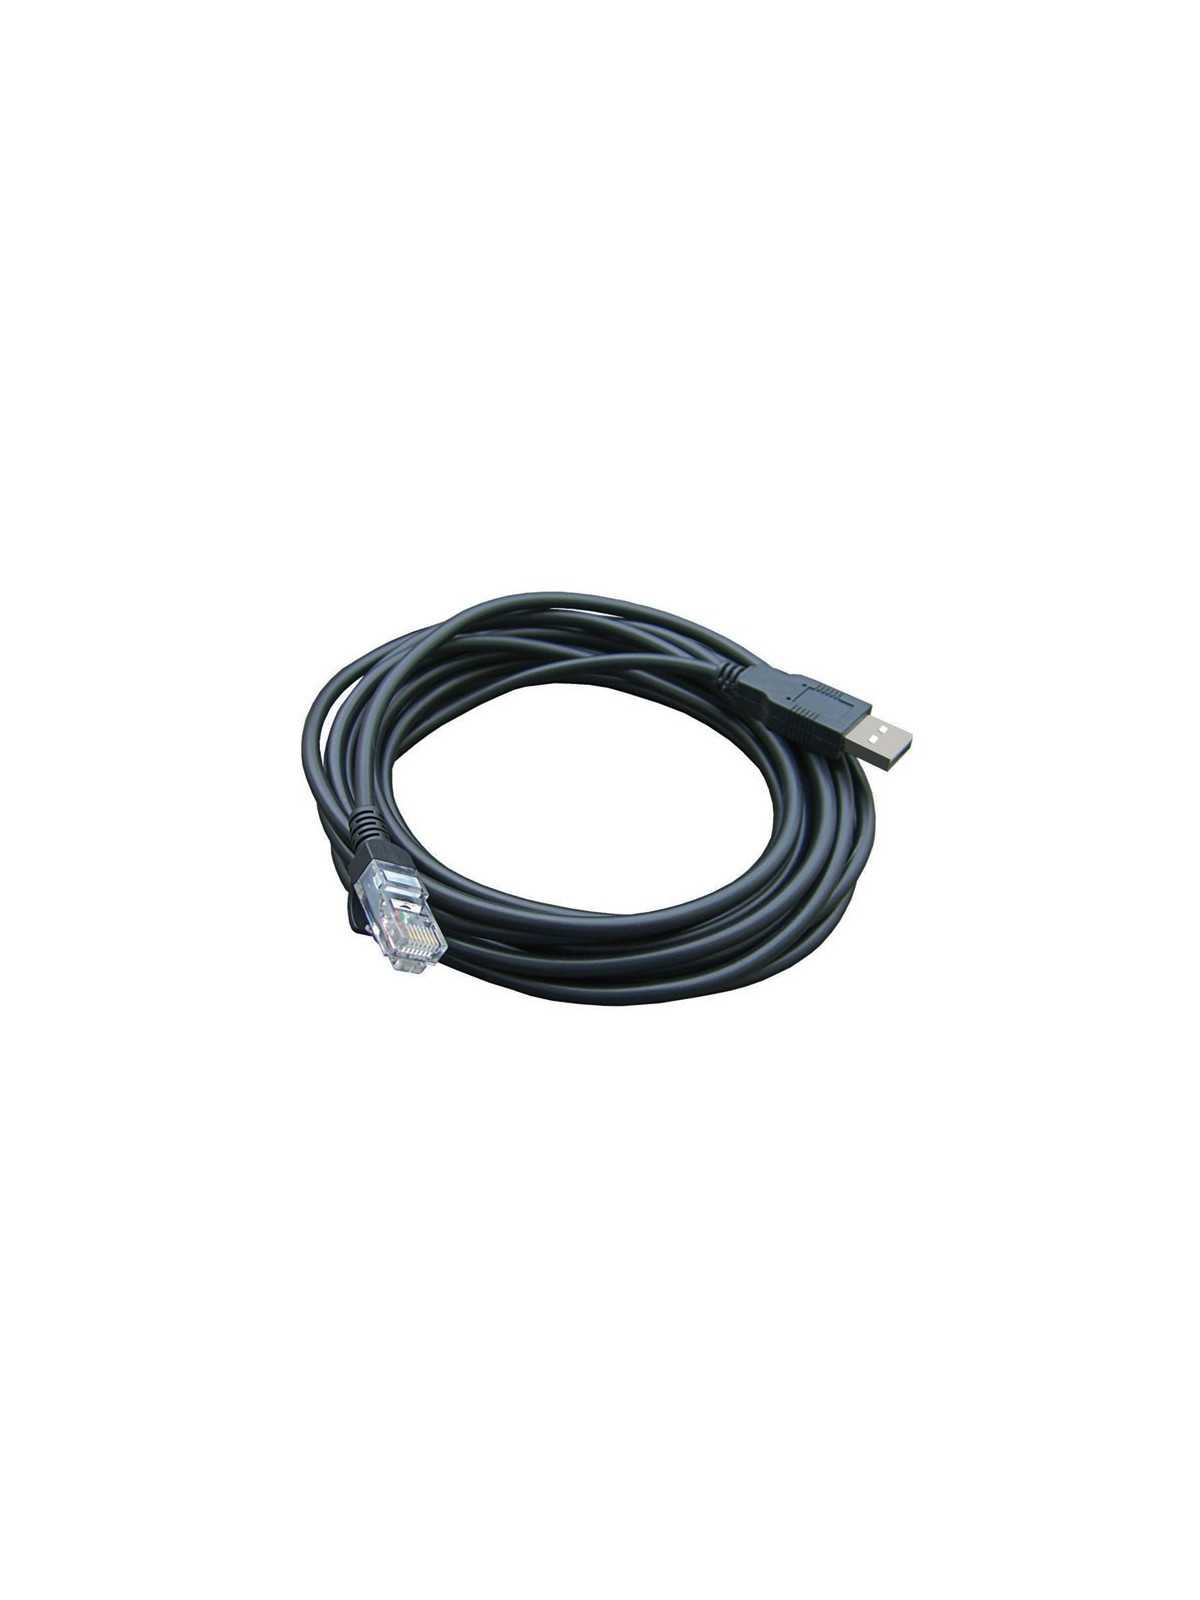 USB - RG45 cable